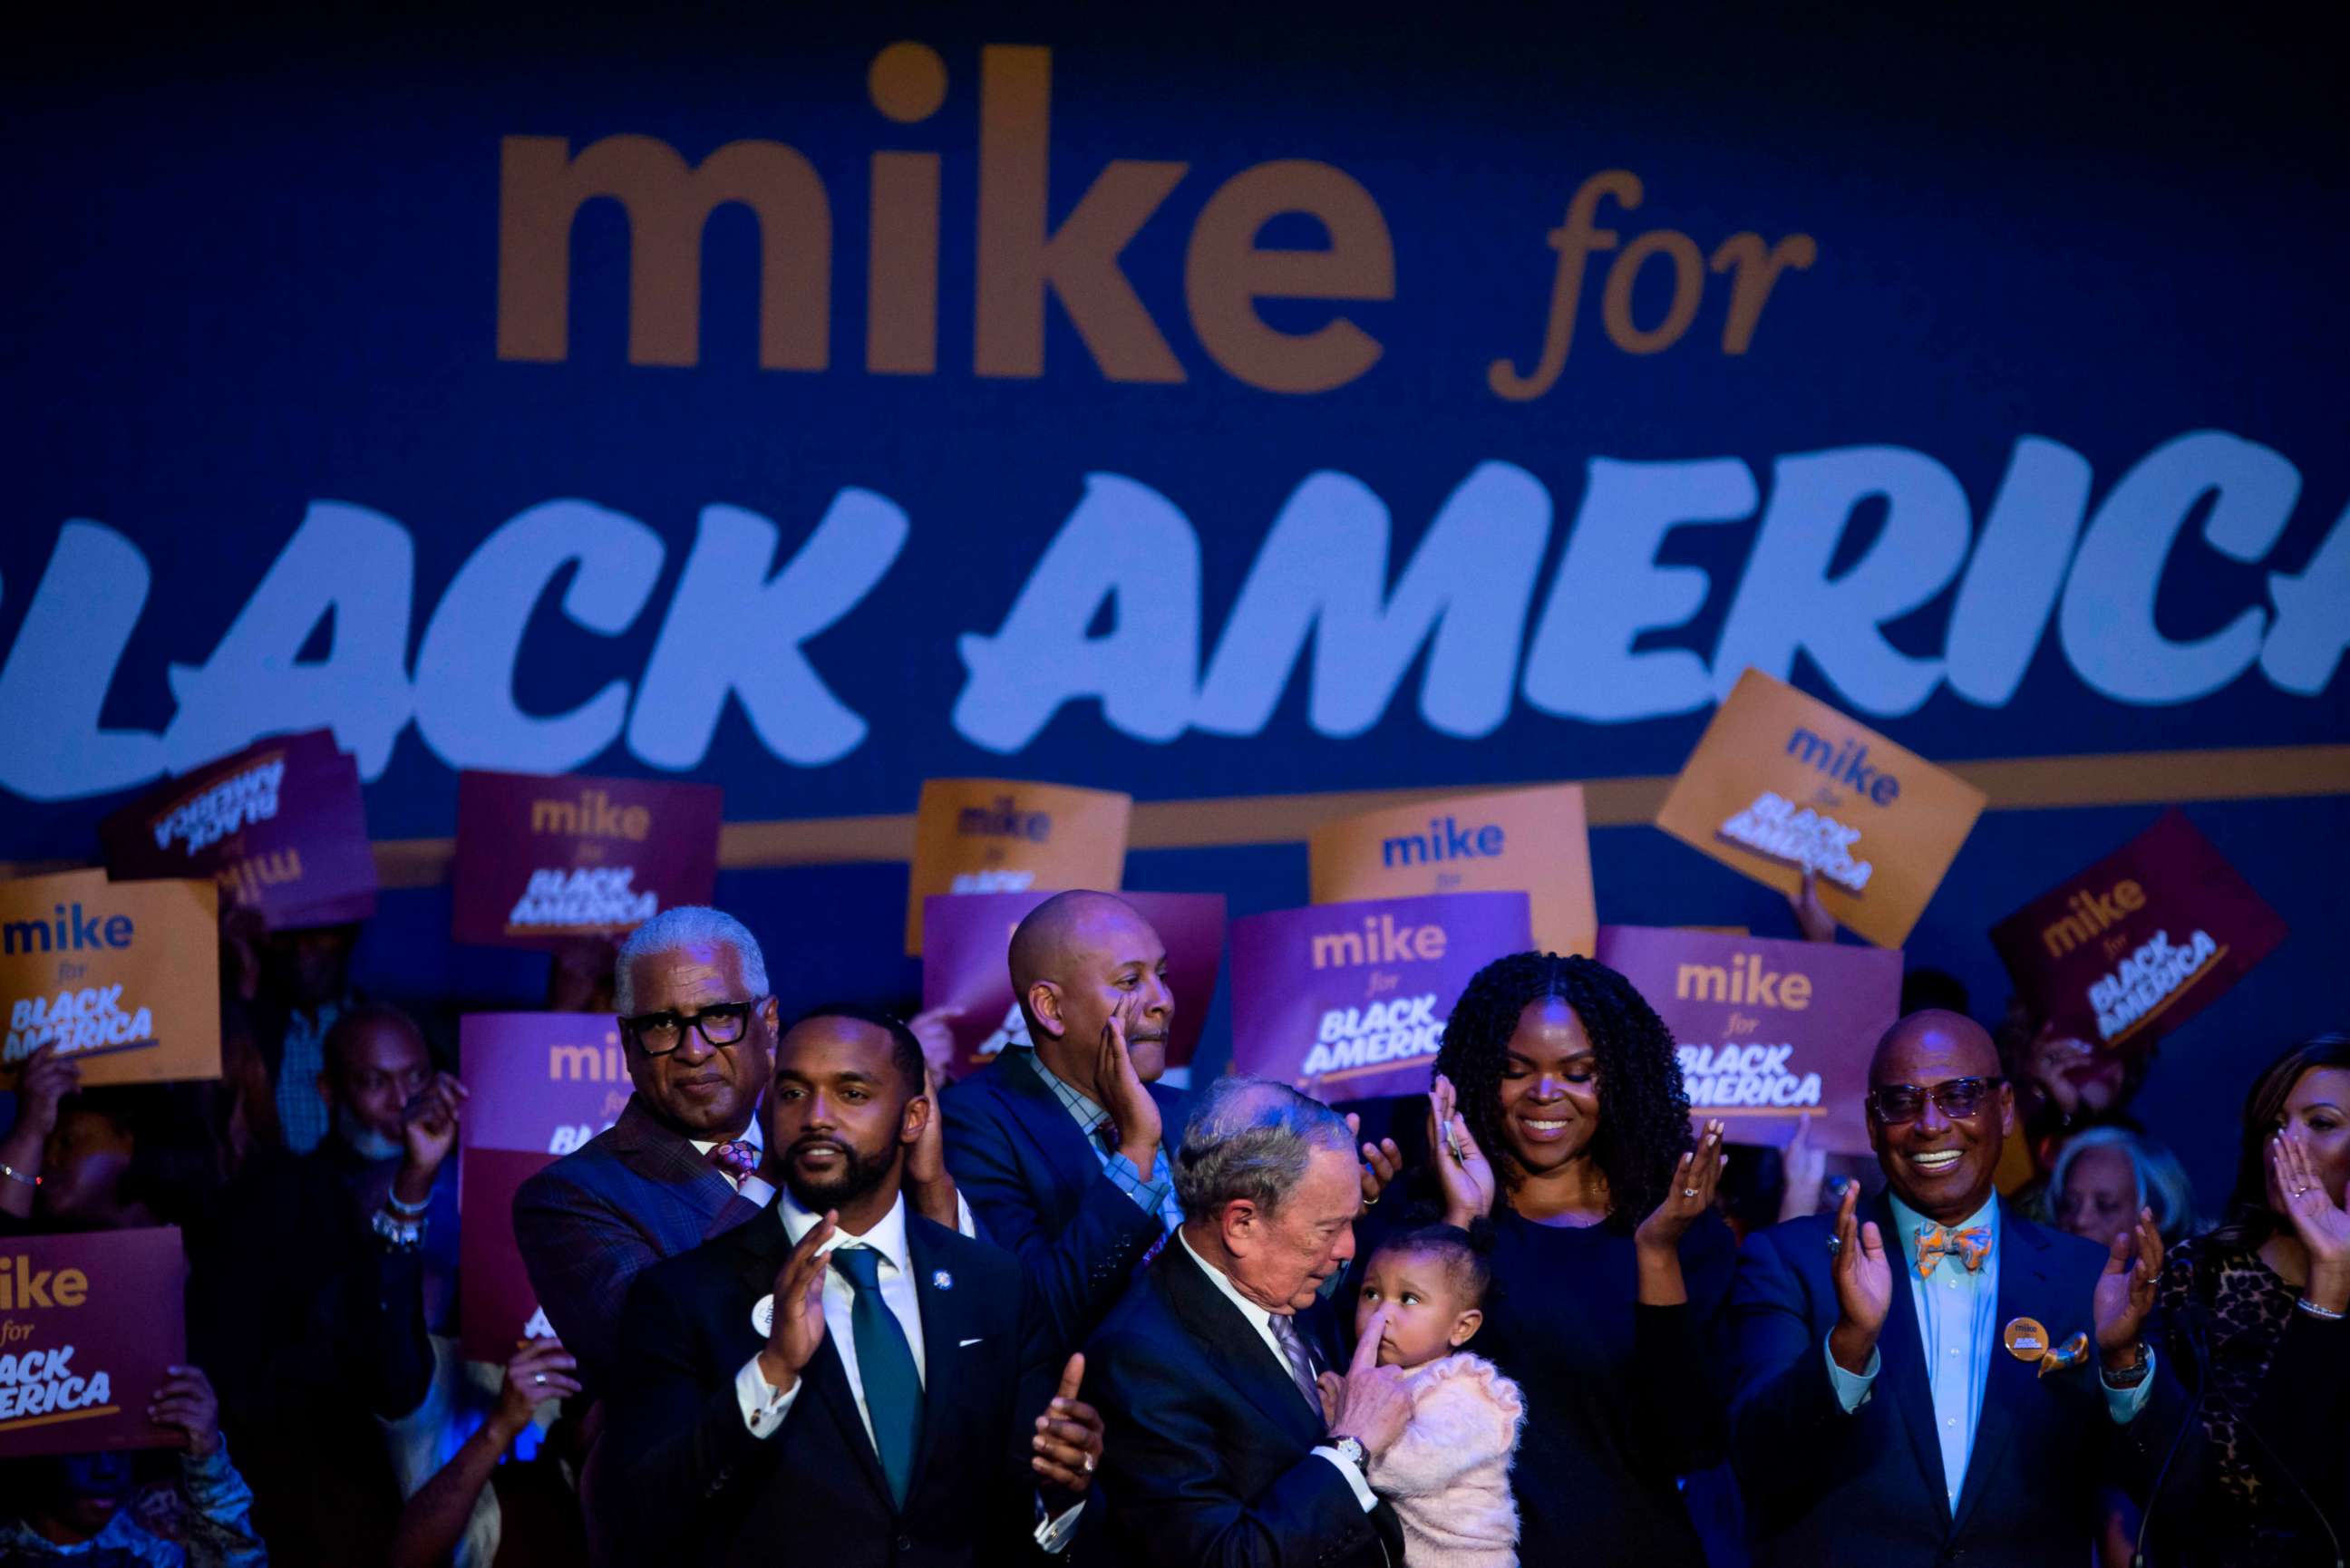 PHOTO: TOPSHOT - Democratic presidential hopeful Mike Bloomberg (C) holds a baby during the "Mike for Black America Launch Celebration" at the Buffalo Soldier National Museum in Houston, Texas, on February 13, 2020. 